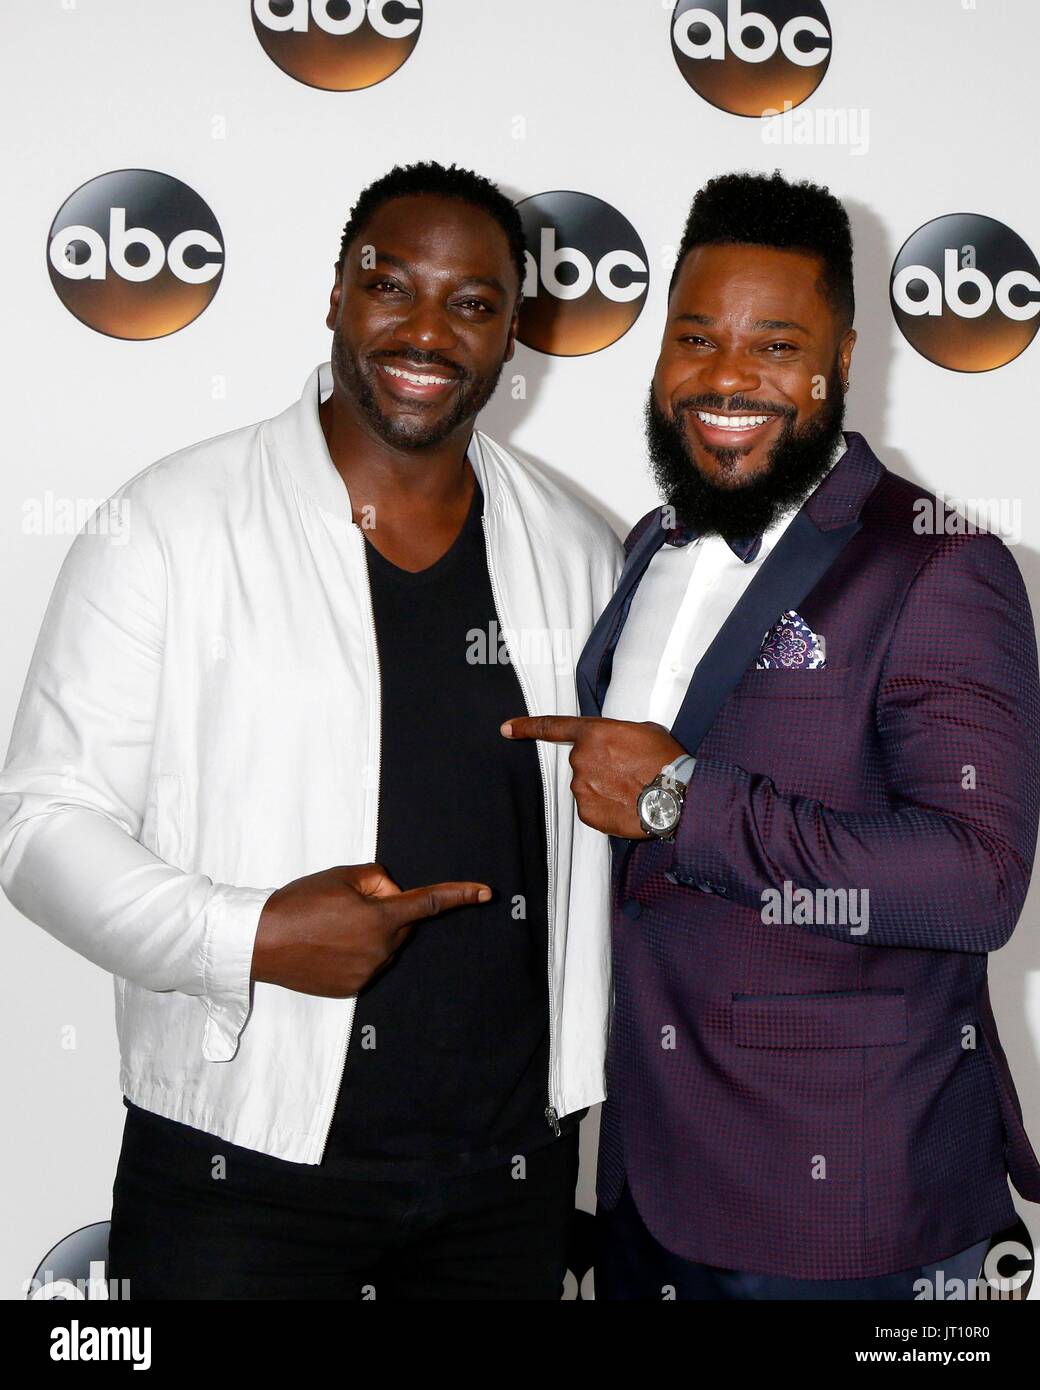 Adewale Akinnuoye-Agbaje, Malcolm-Jamal Warner at arrivals for ABC's TCA Summer Press Tour Party - Part 2, The Beverly Hilton Hotel, Beverly Hills, CA August 6, 2017. Photo By: Priscilla Grant/Everett Collection Stock Photo